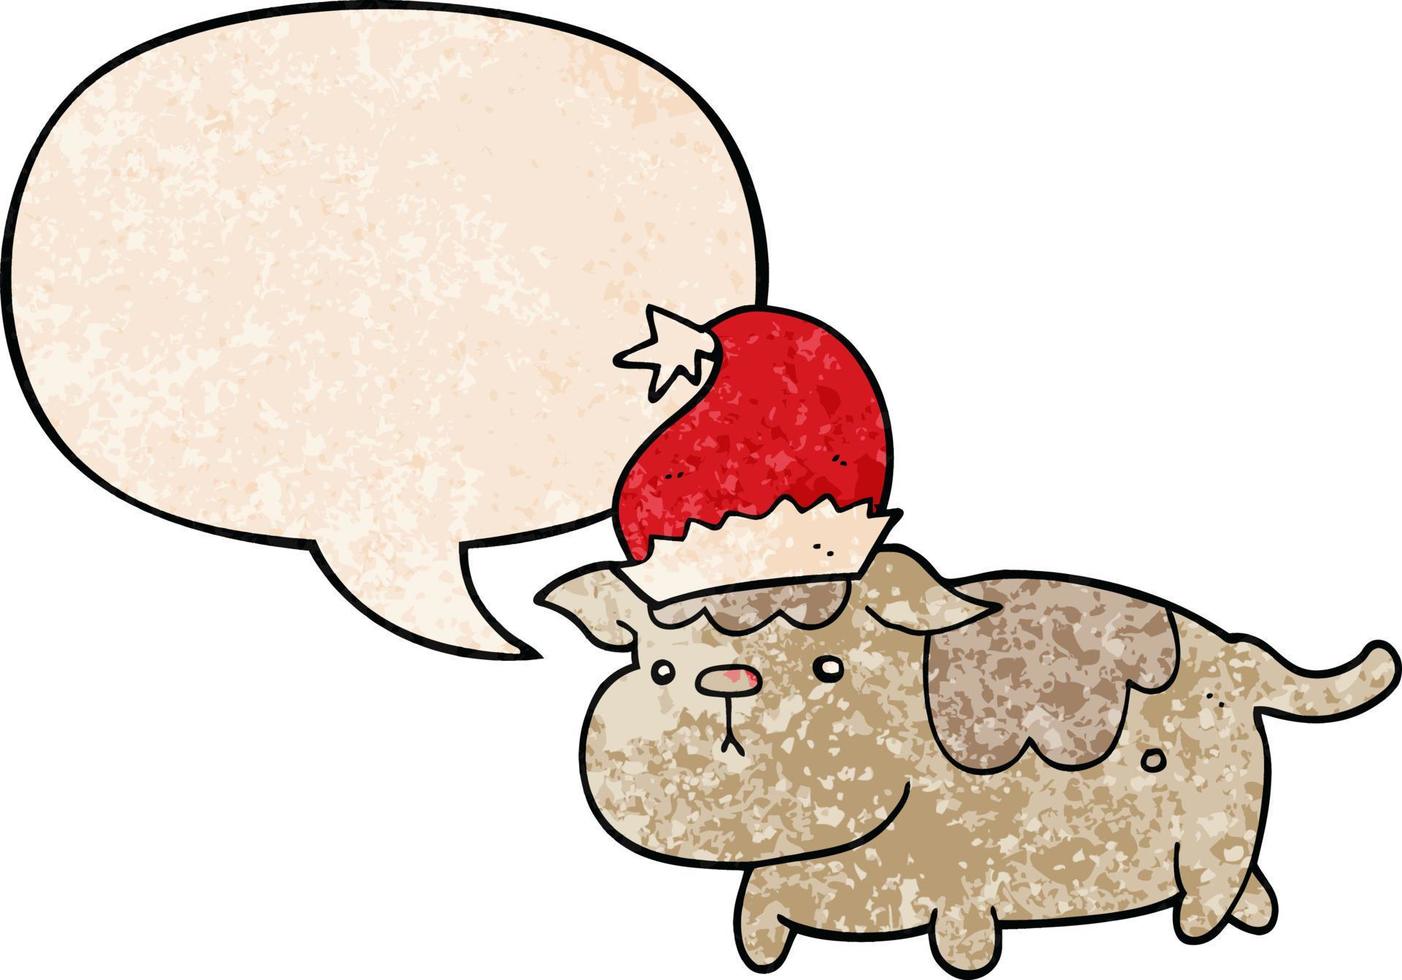 cute christmas dog and speech bubble in retro texture style vector